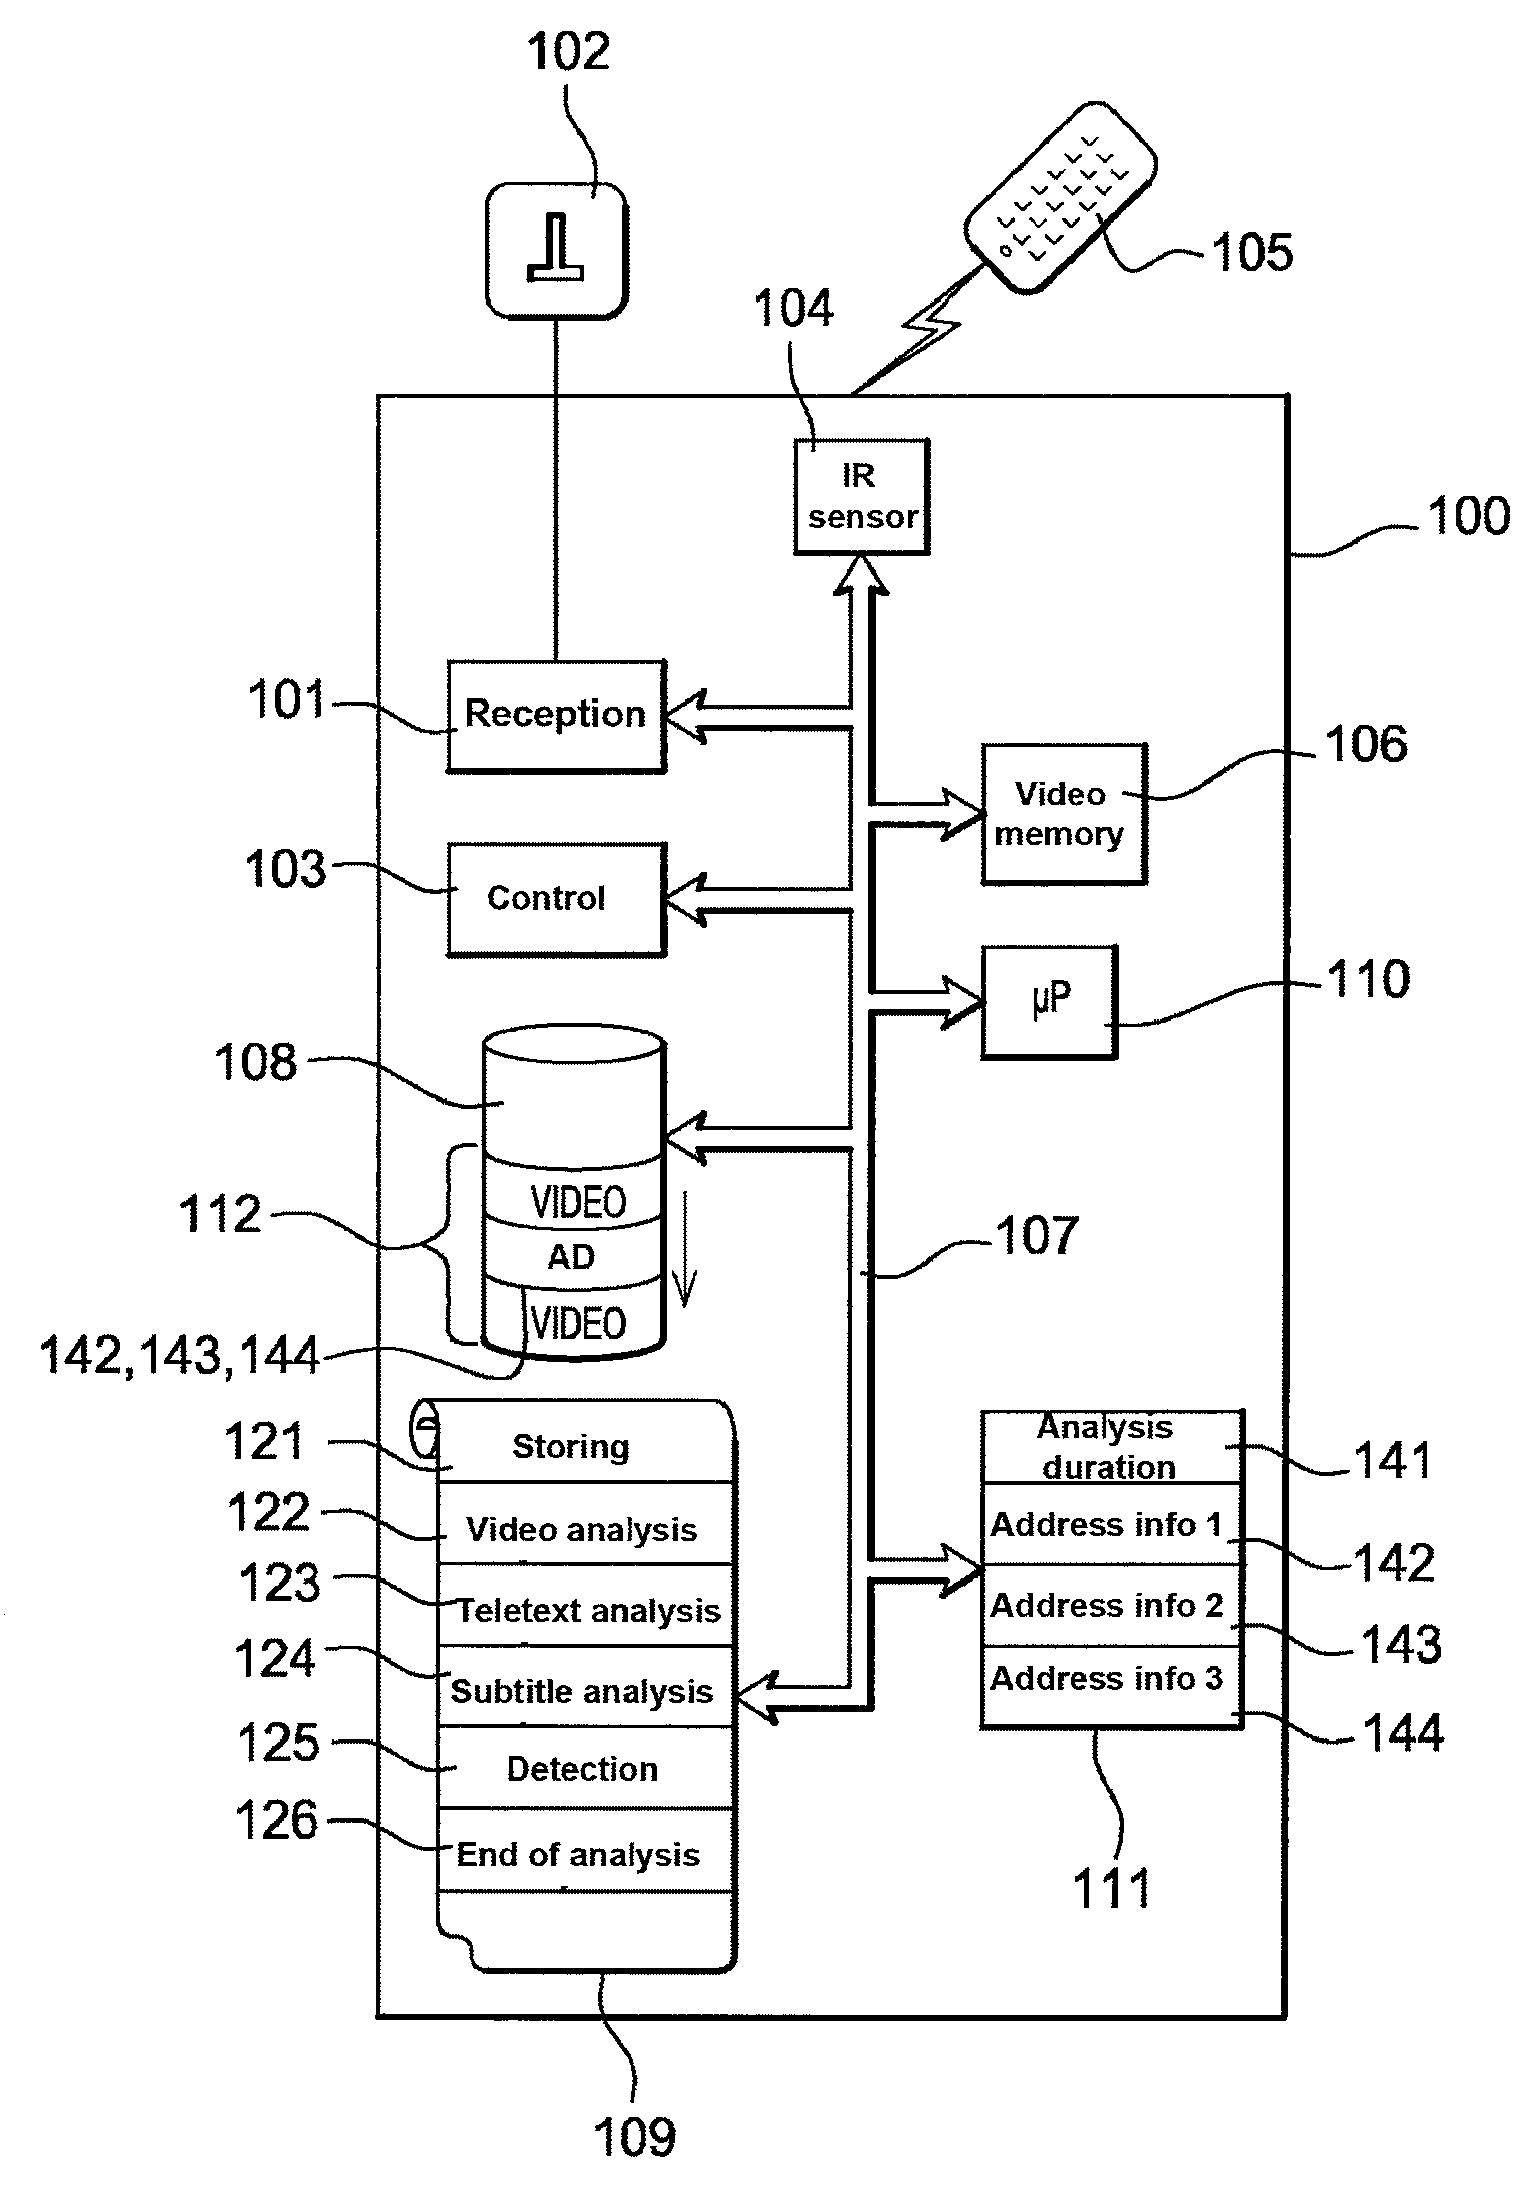 Method for managing advertising detection in an electronic apparatus, such as a digital television decoder